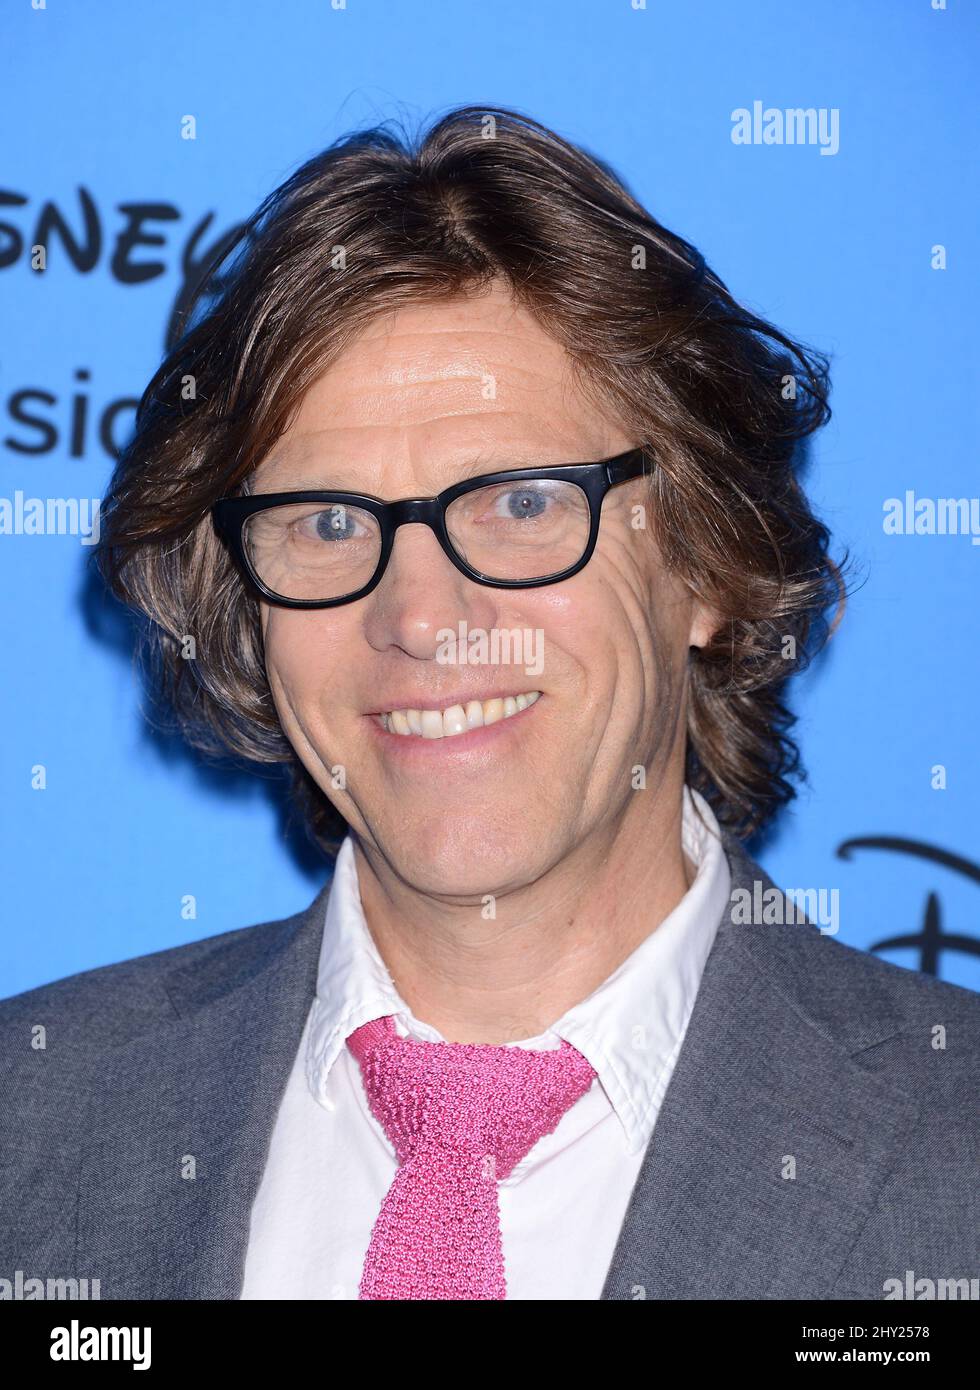 Simon Templeman attends the ABC Summer TCA Press Tour held at the Beverly Hilton Hotel, Beverly Hills, California on August 4, 2013. Stock Photo